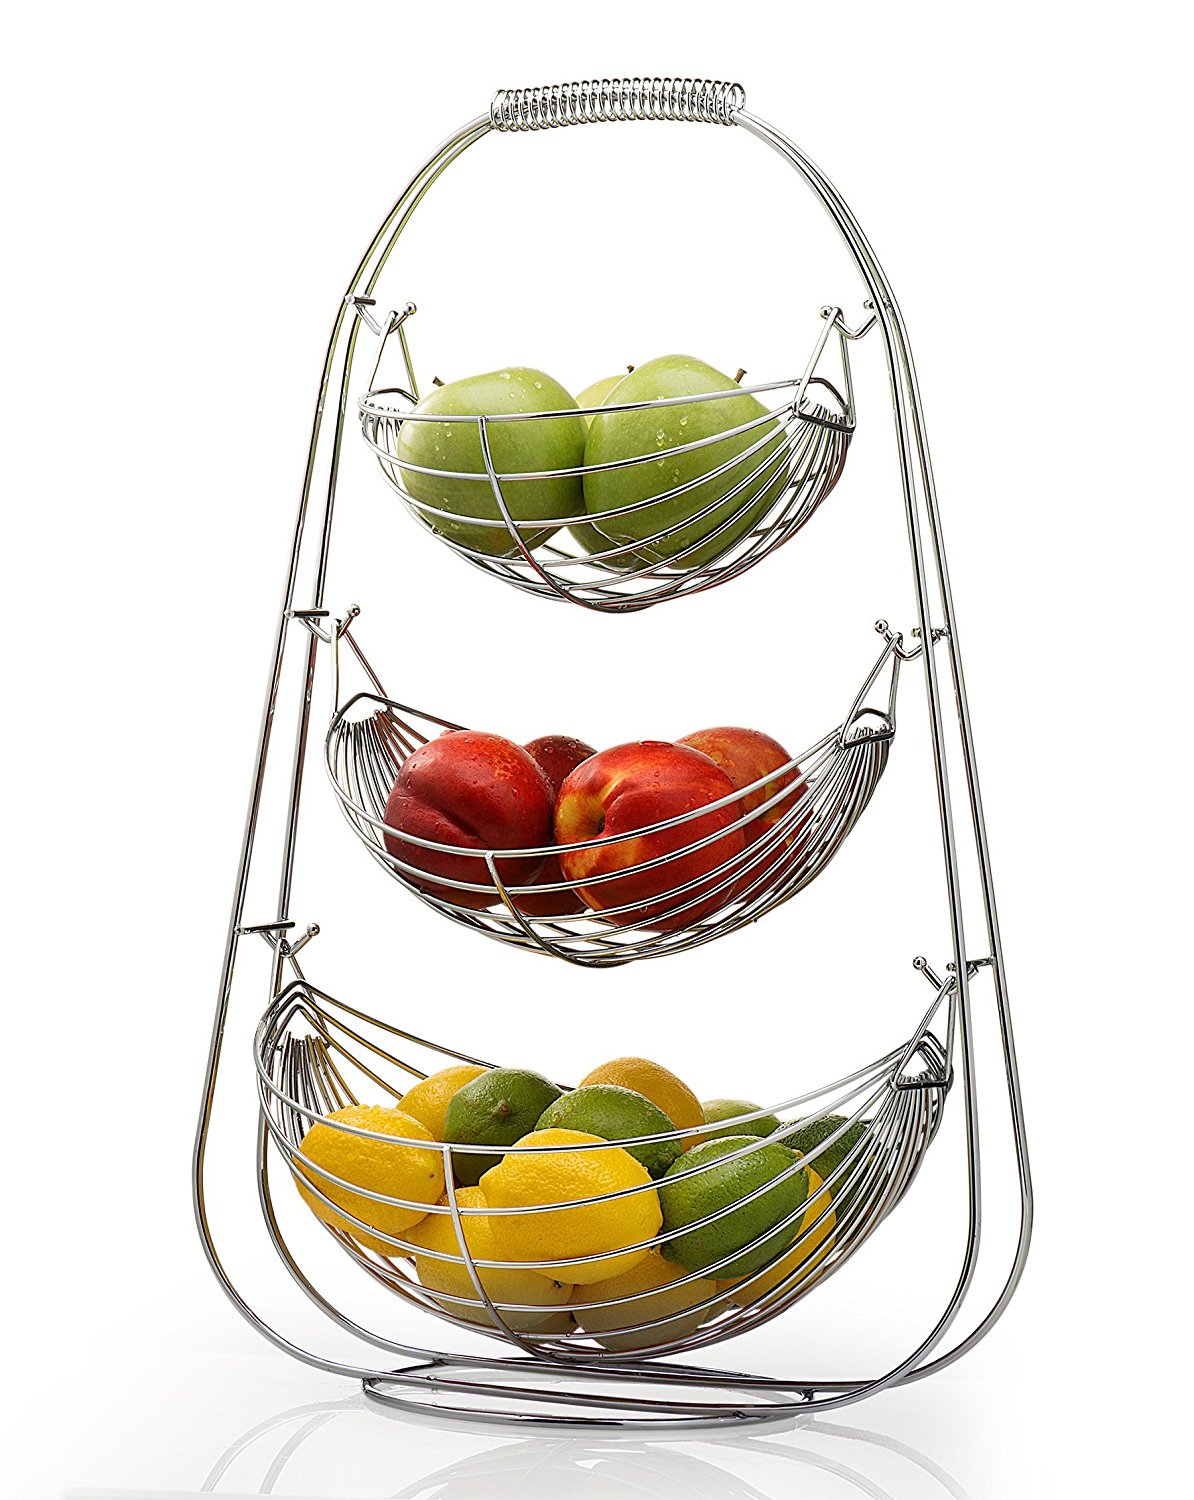 Stainless Steel Tiered Fruit Baskets